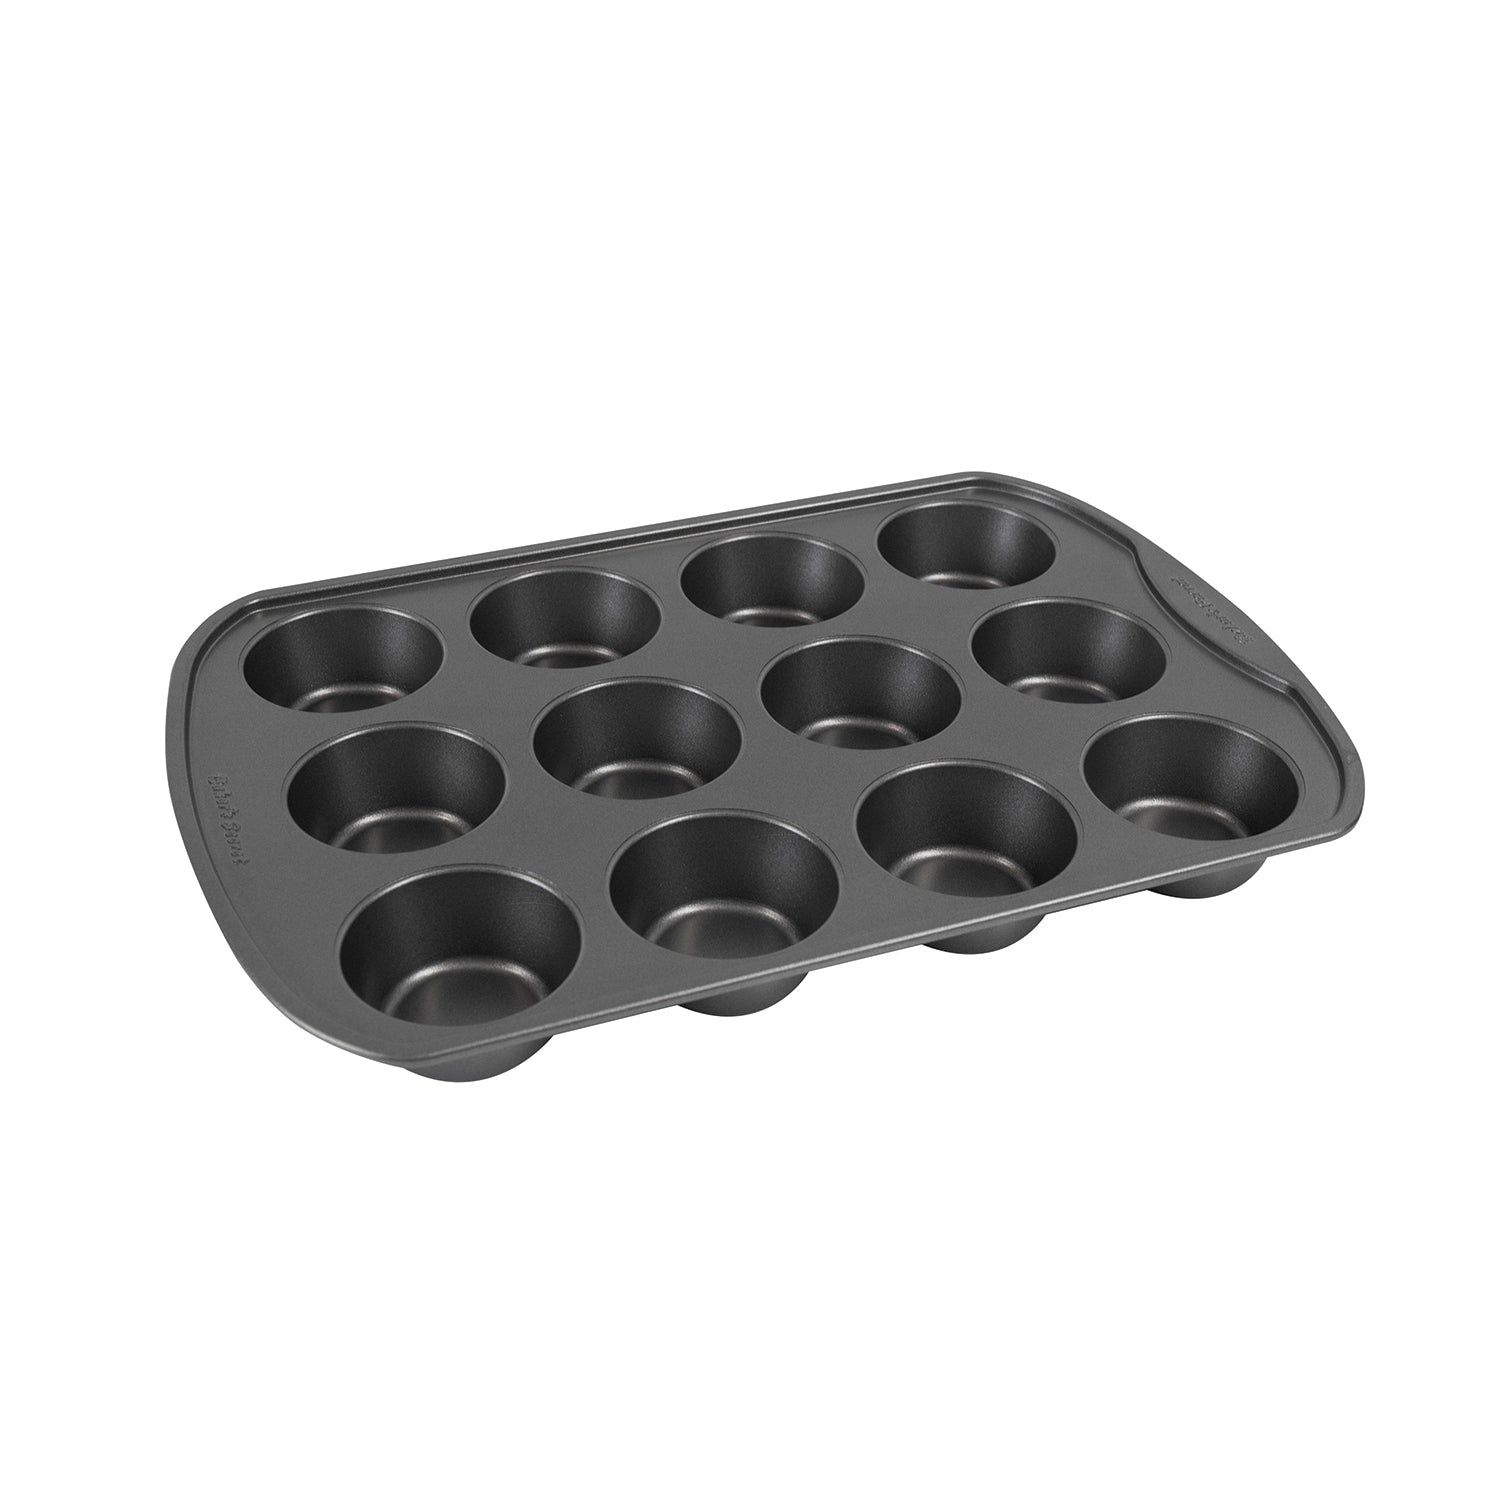 12 Cups Muffin Pan  Muffin & Pastry Pans - Baker's Secret